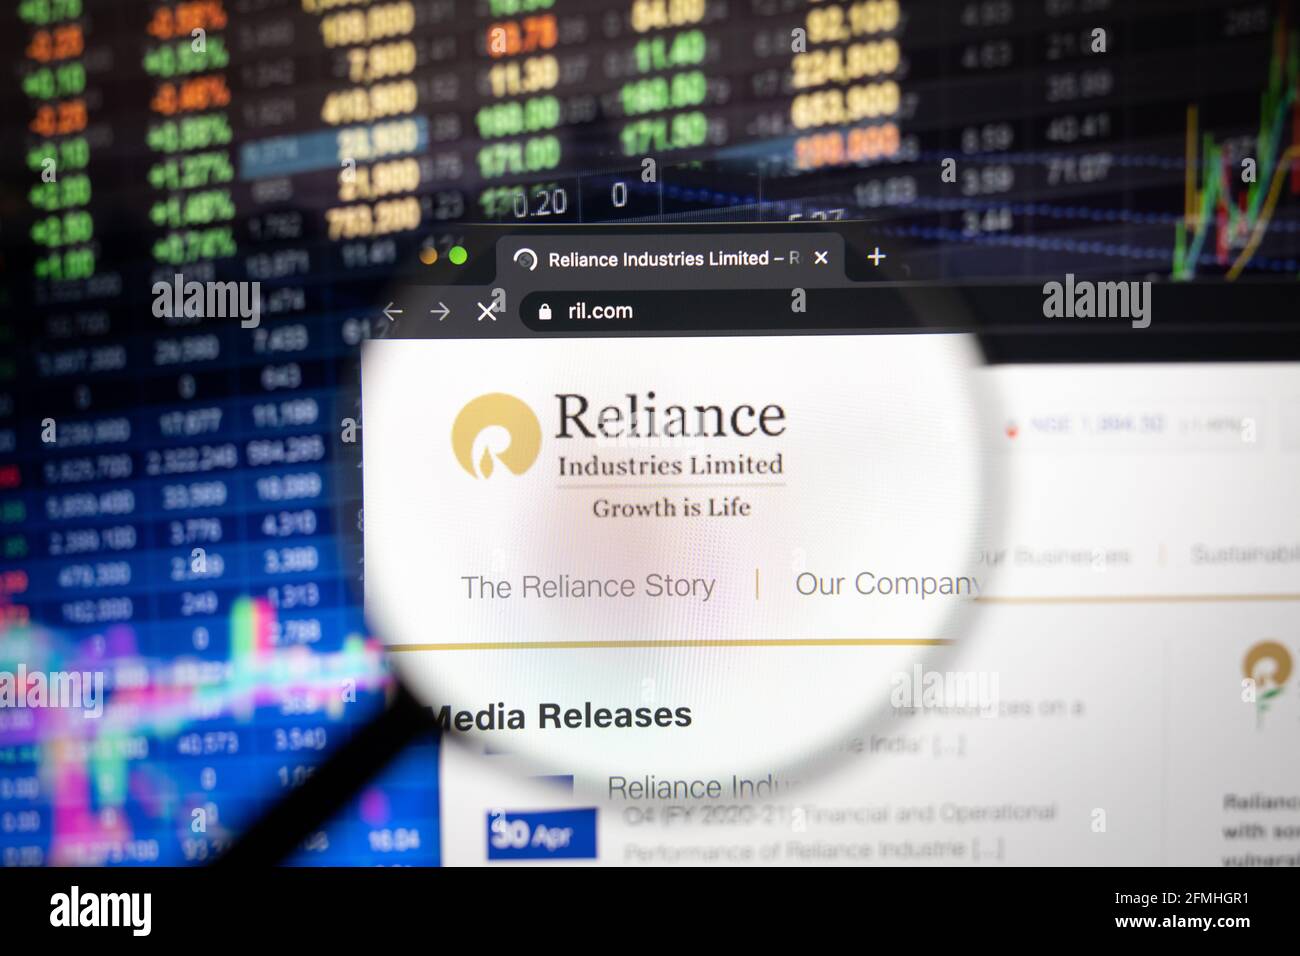 Reliance Industries Limited company logo on a website with blurry stock market developments in the background, seen on a computer screen Stock Photo